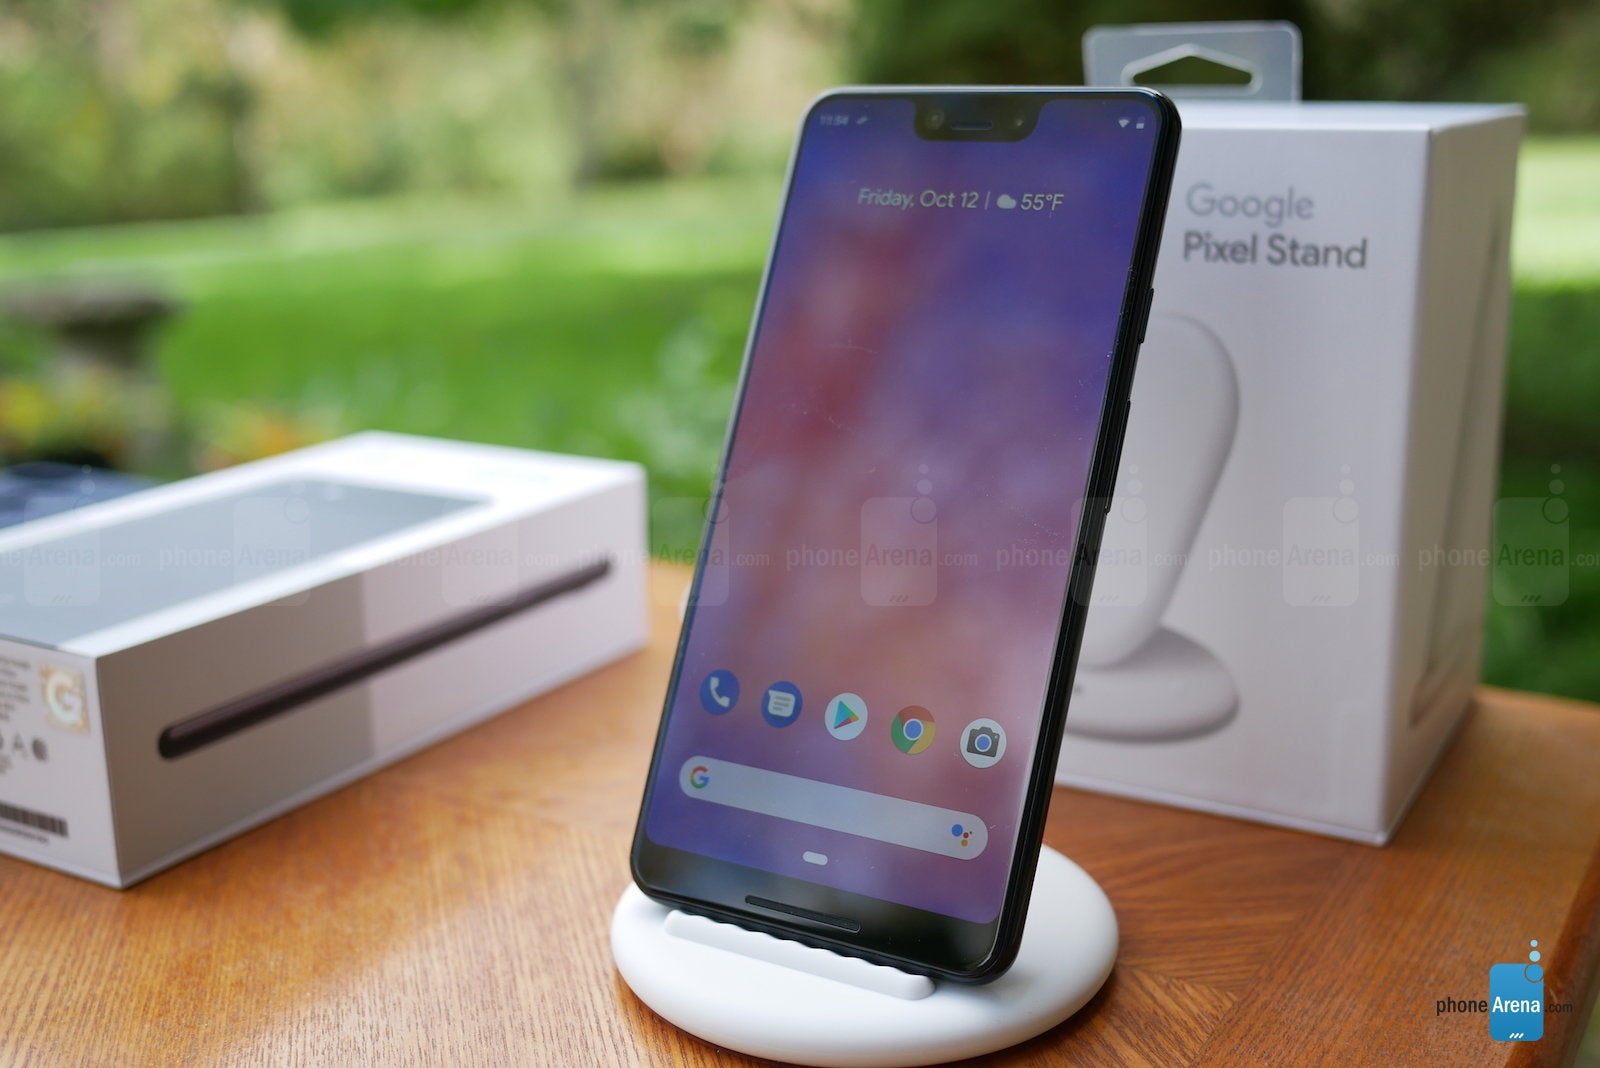 Google Pixel 3 XL and Pixel Stand Unboxing and First Look!